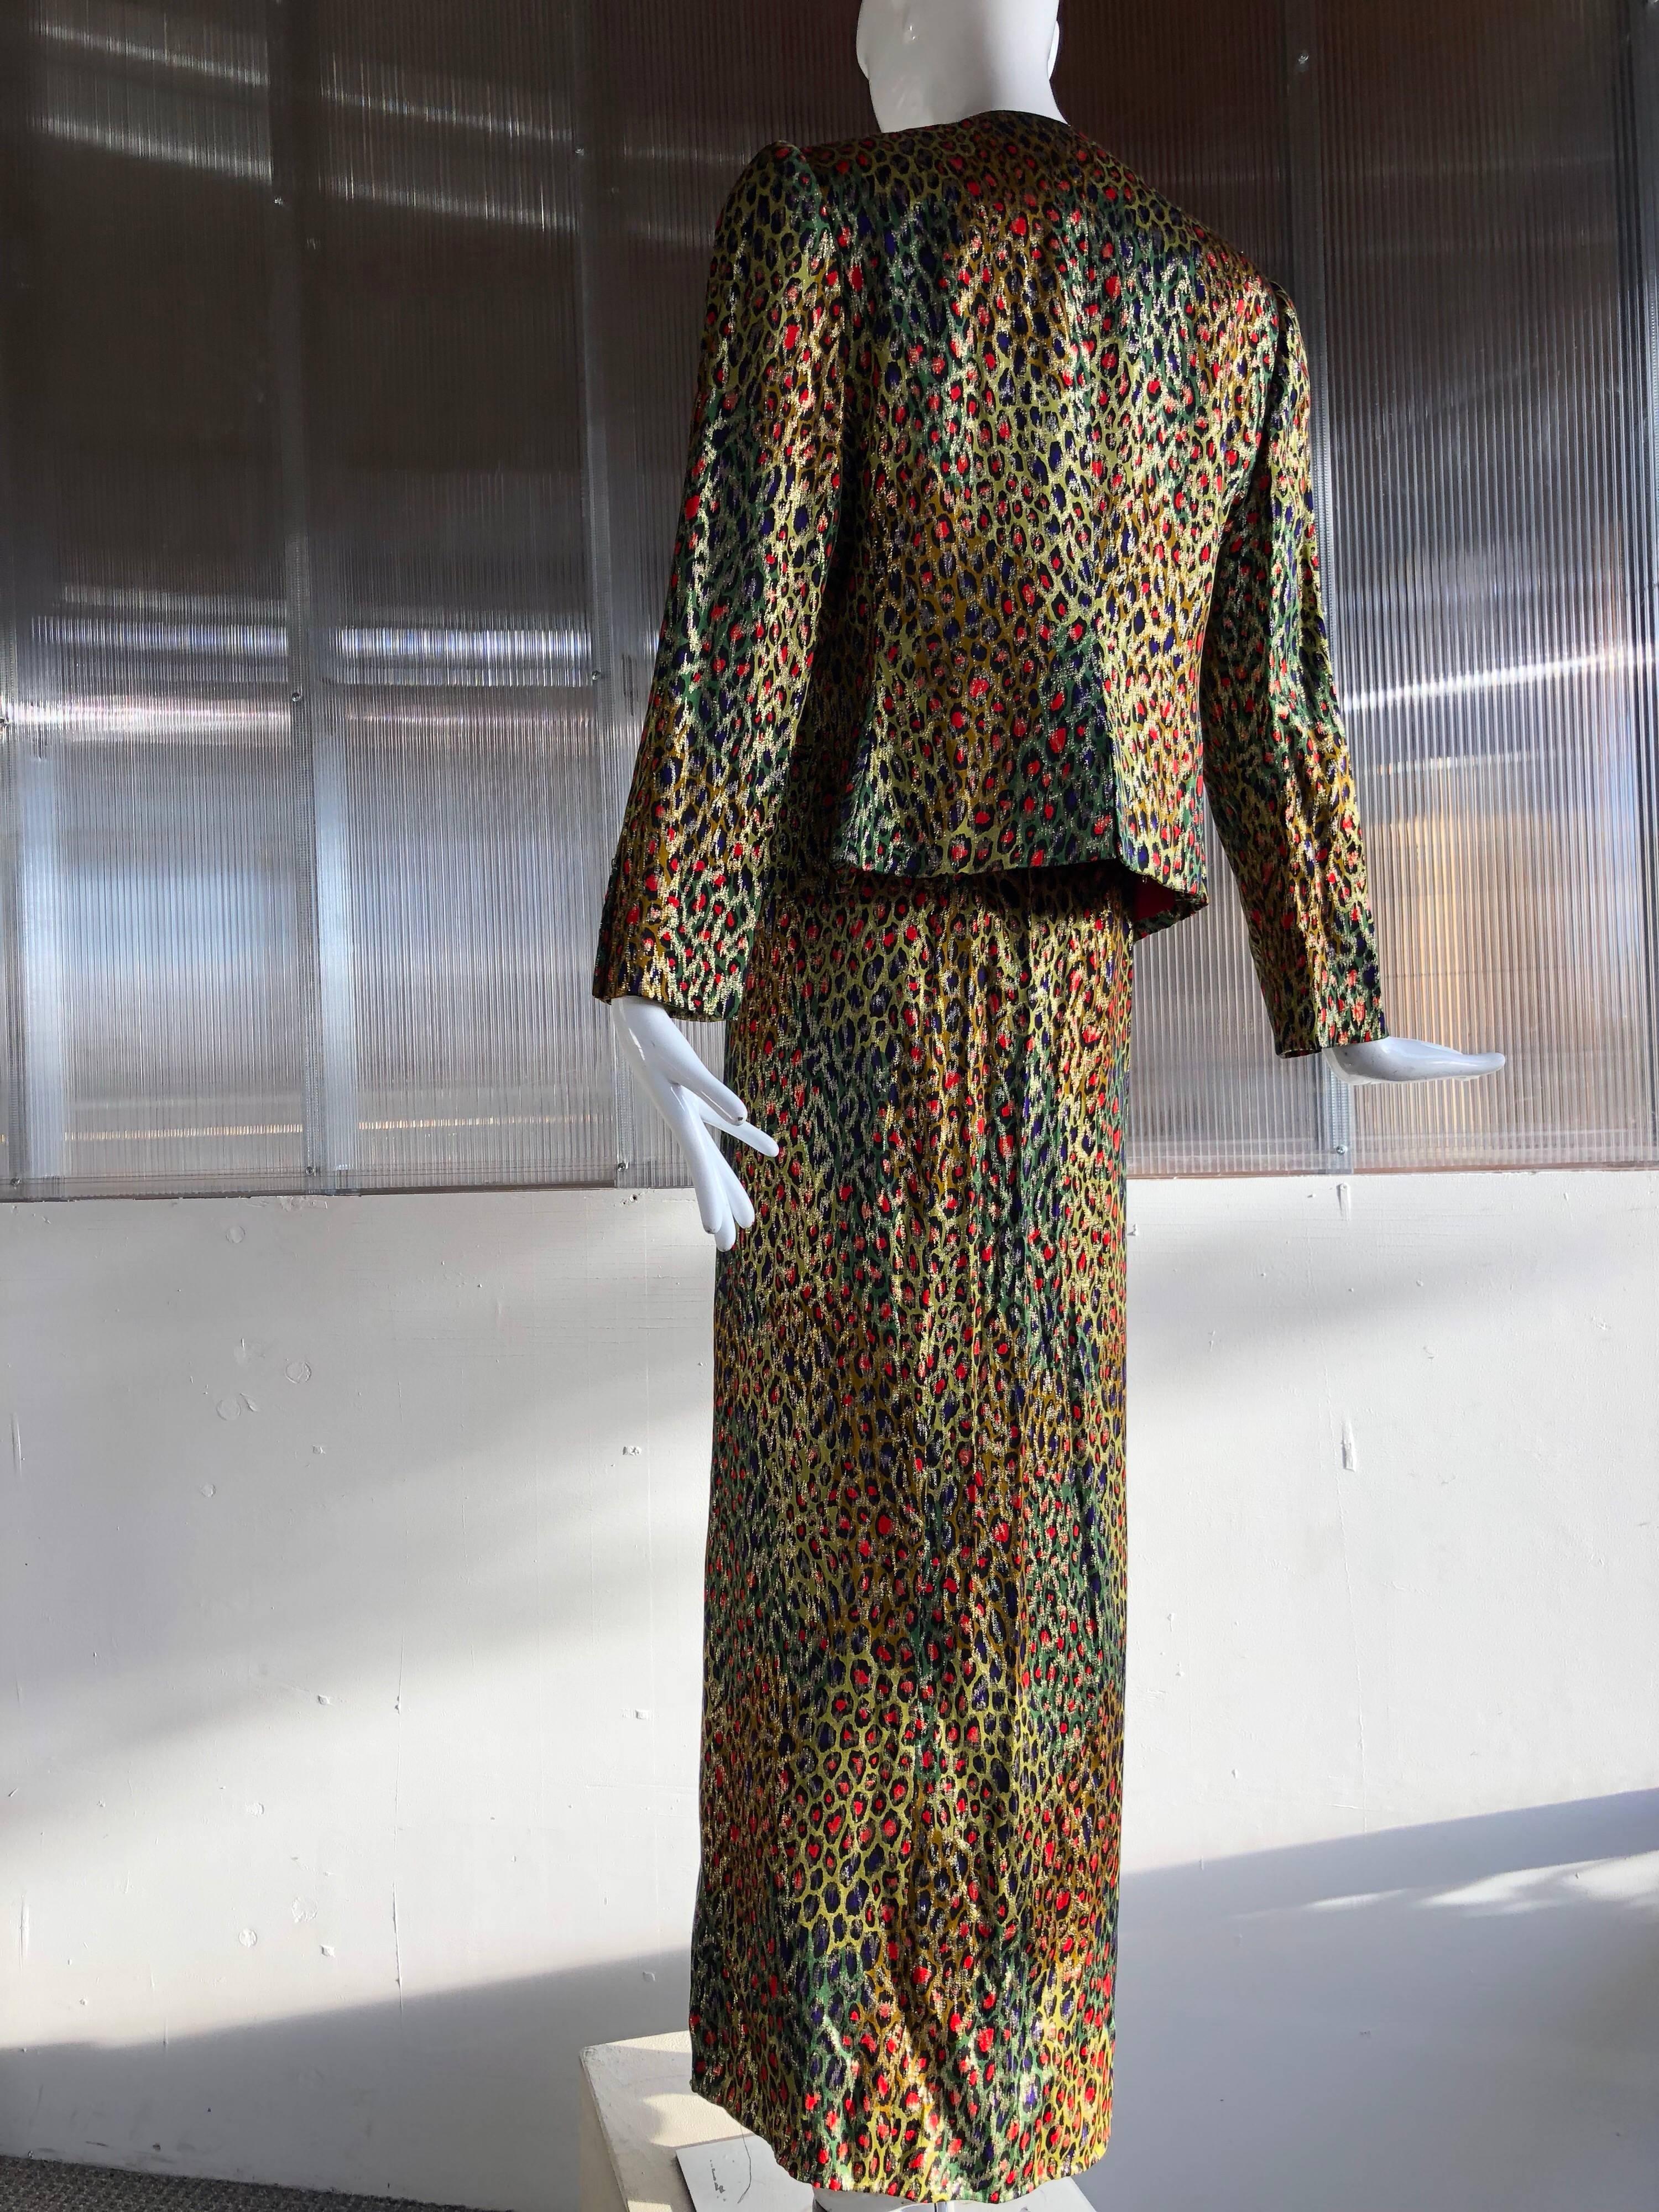 An exciting 1980s Bill Blass silk lame op-art leopard print long skirt and suit jacket set:  The leopard print is shot through with a rainbow of neon colors in the eyes of the leopard pattern!  The skirt is a long wrap style with high slit on right